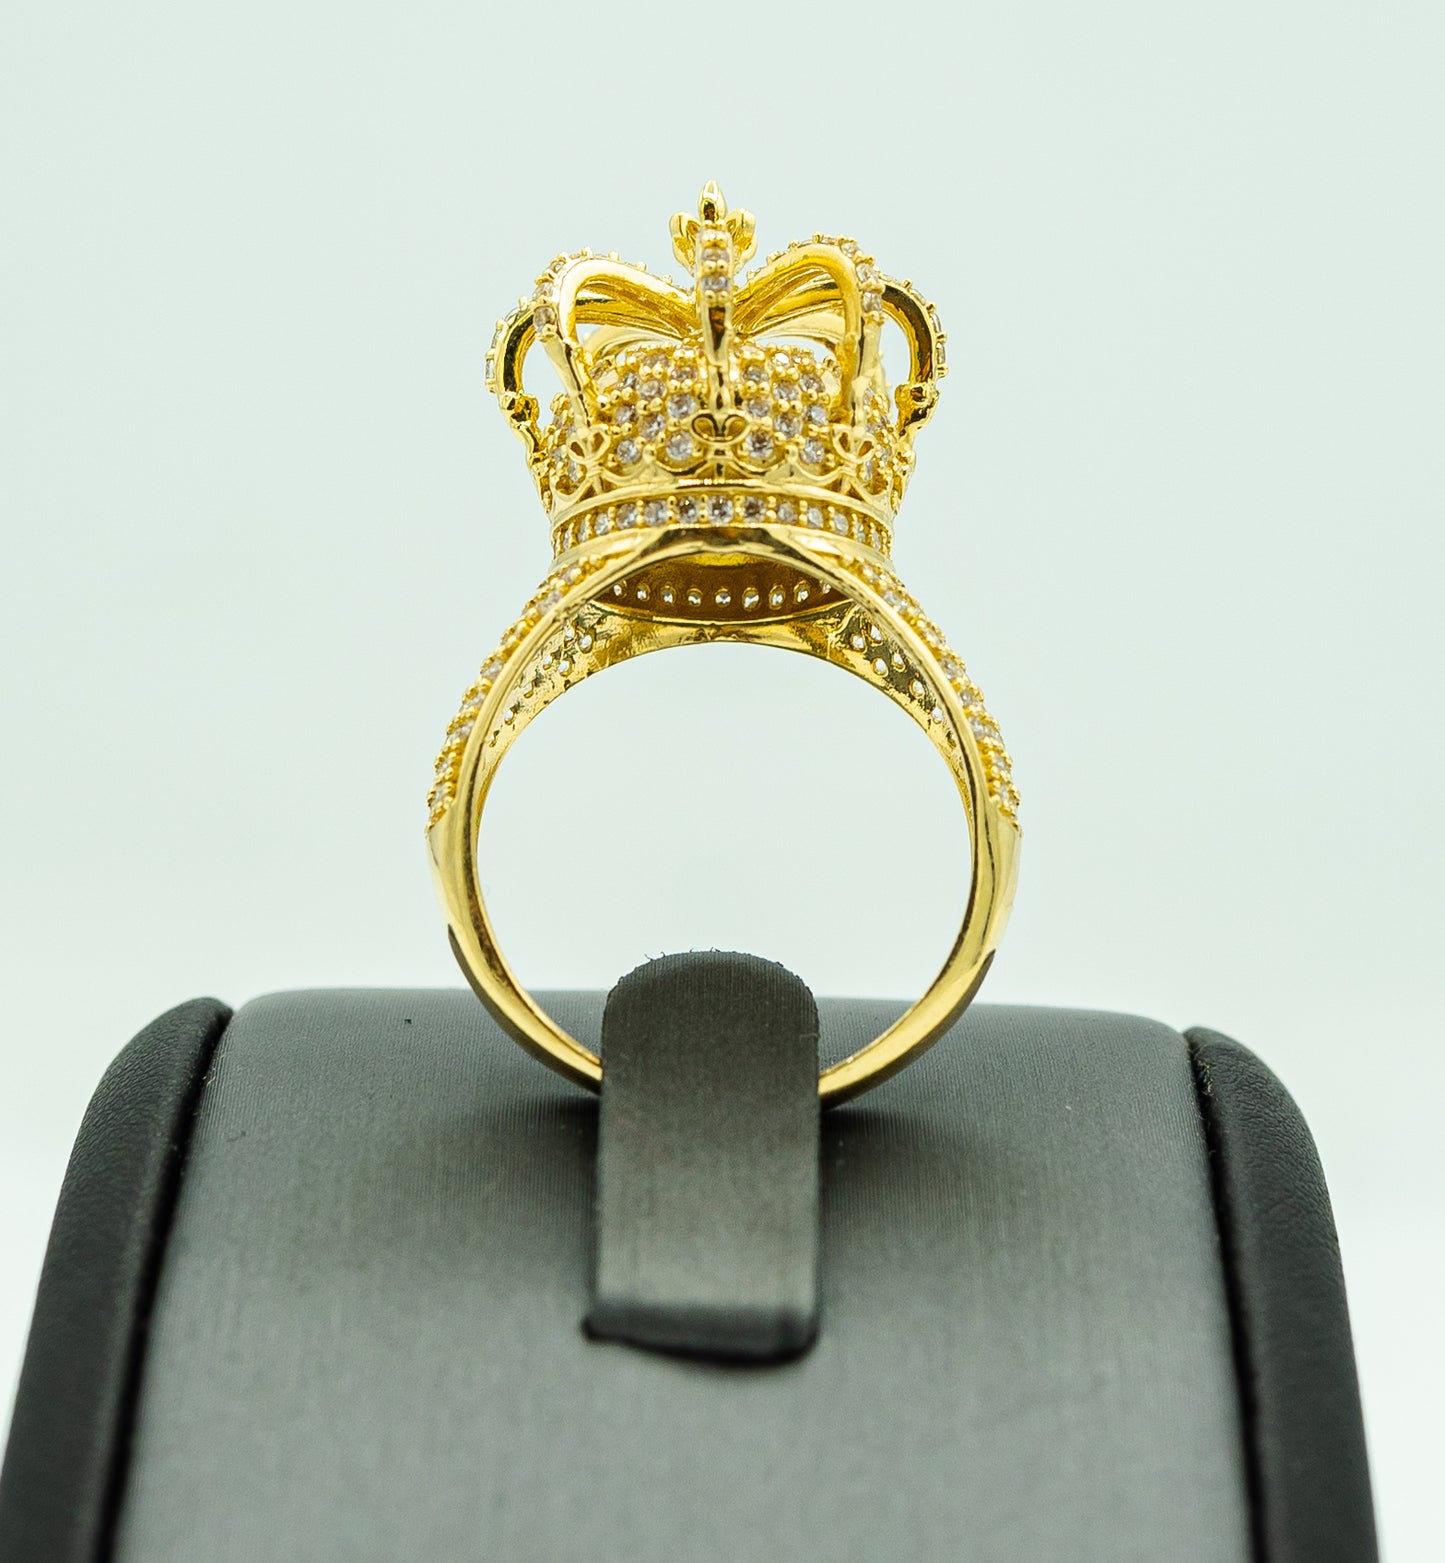 14k crown ring by GDO